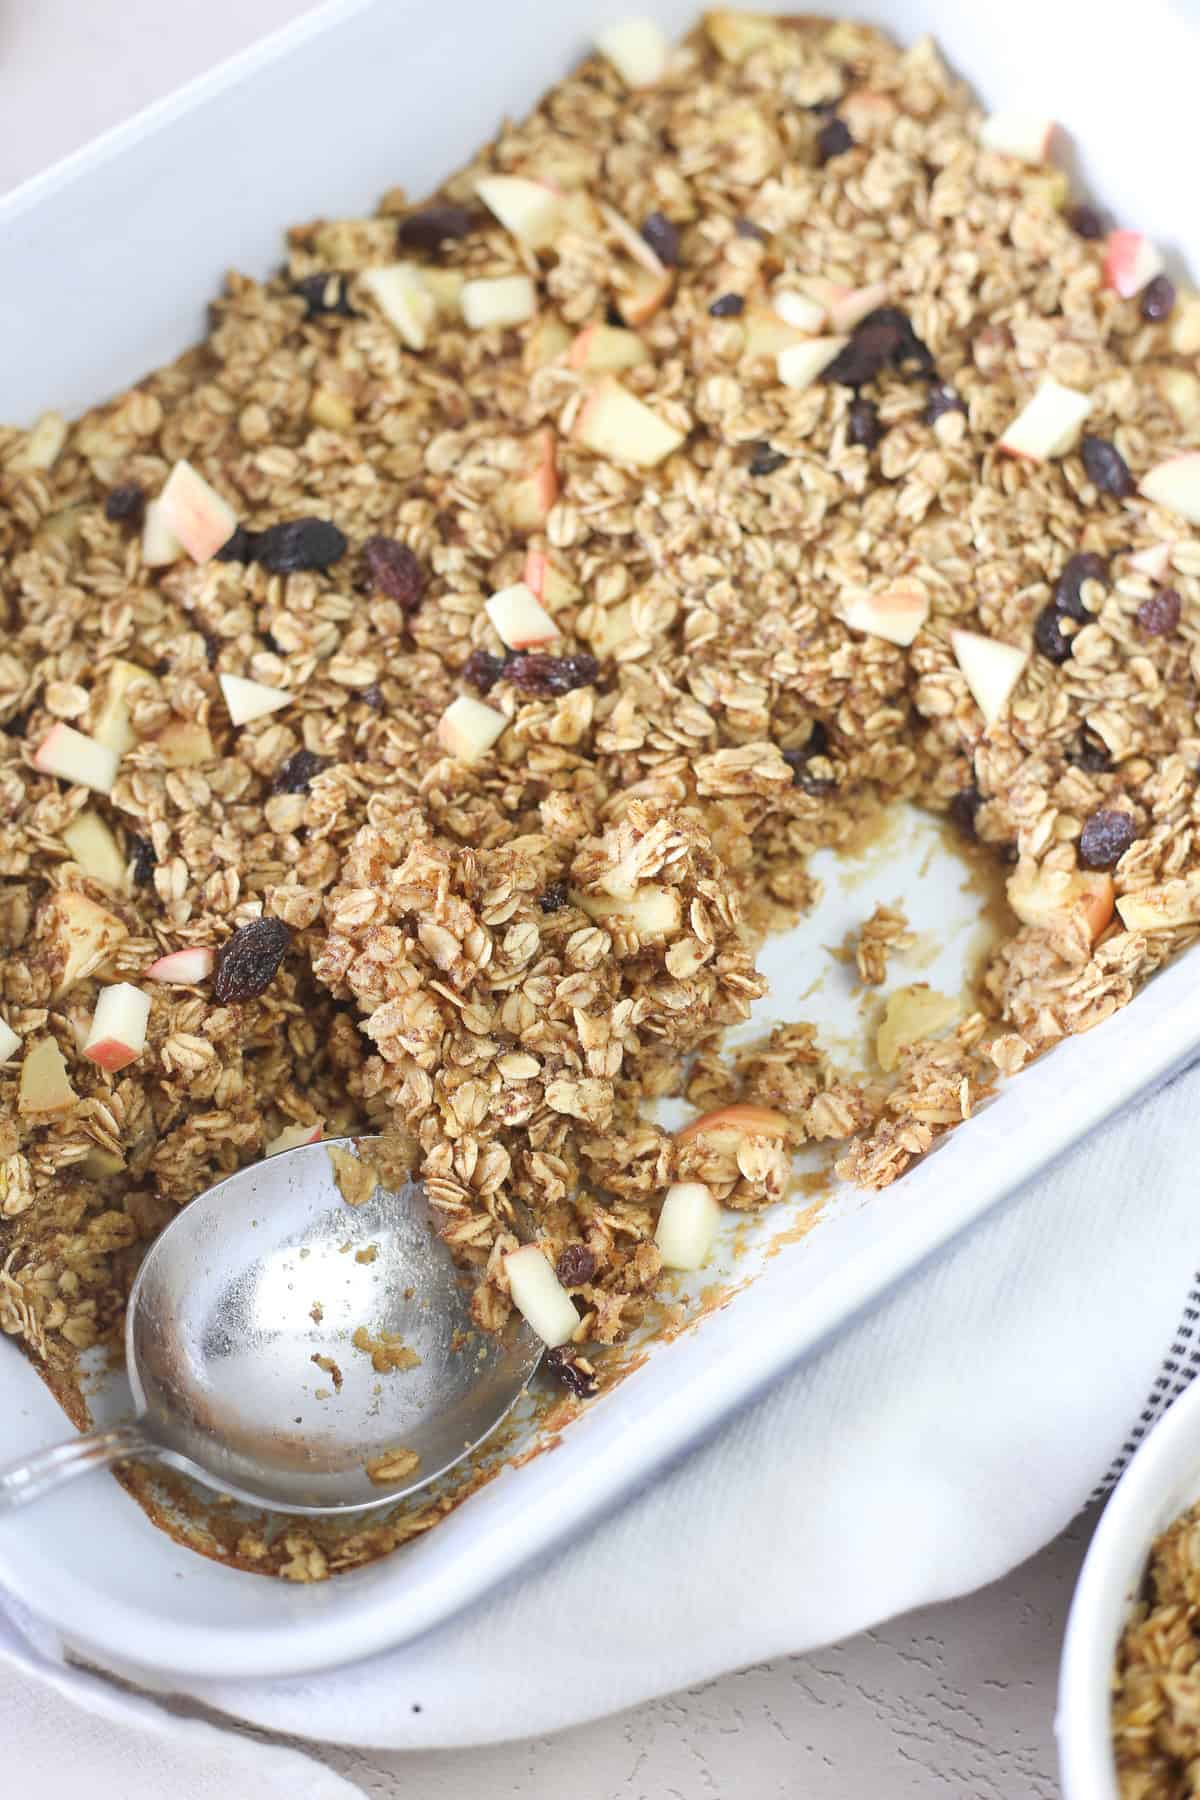 Apple Baked Oatmeal in a dish.
